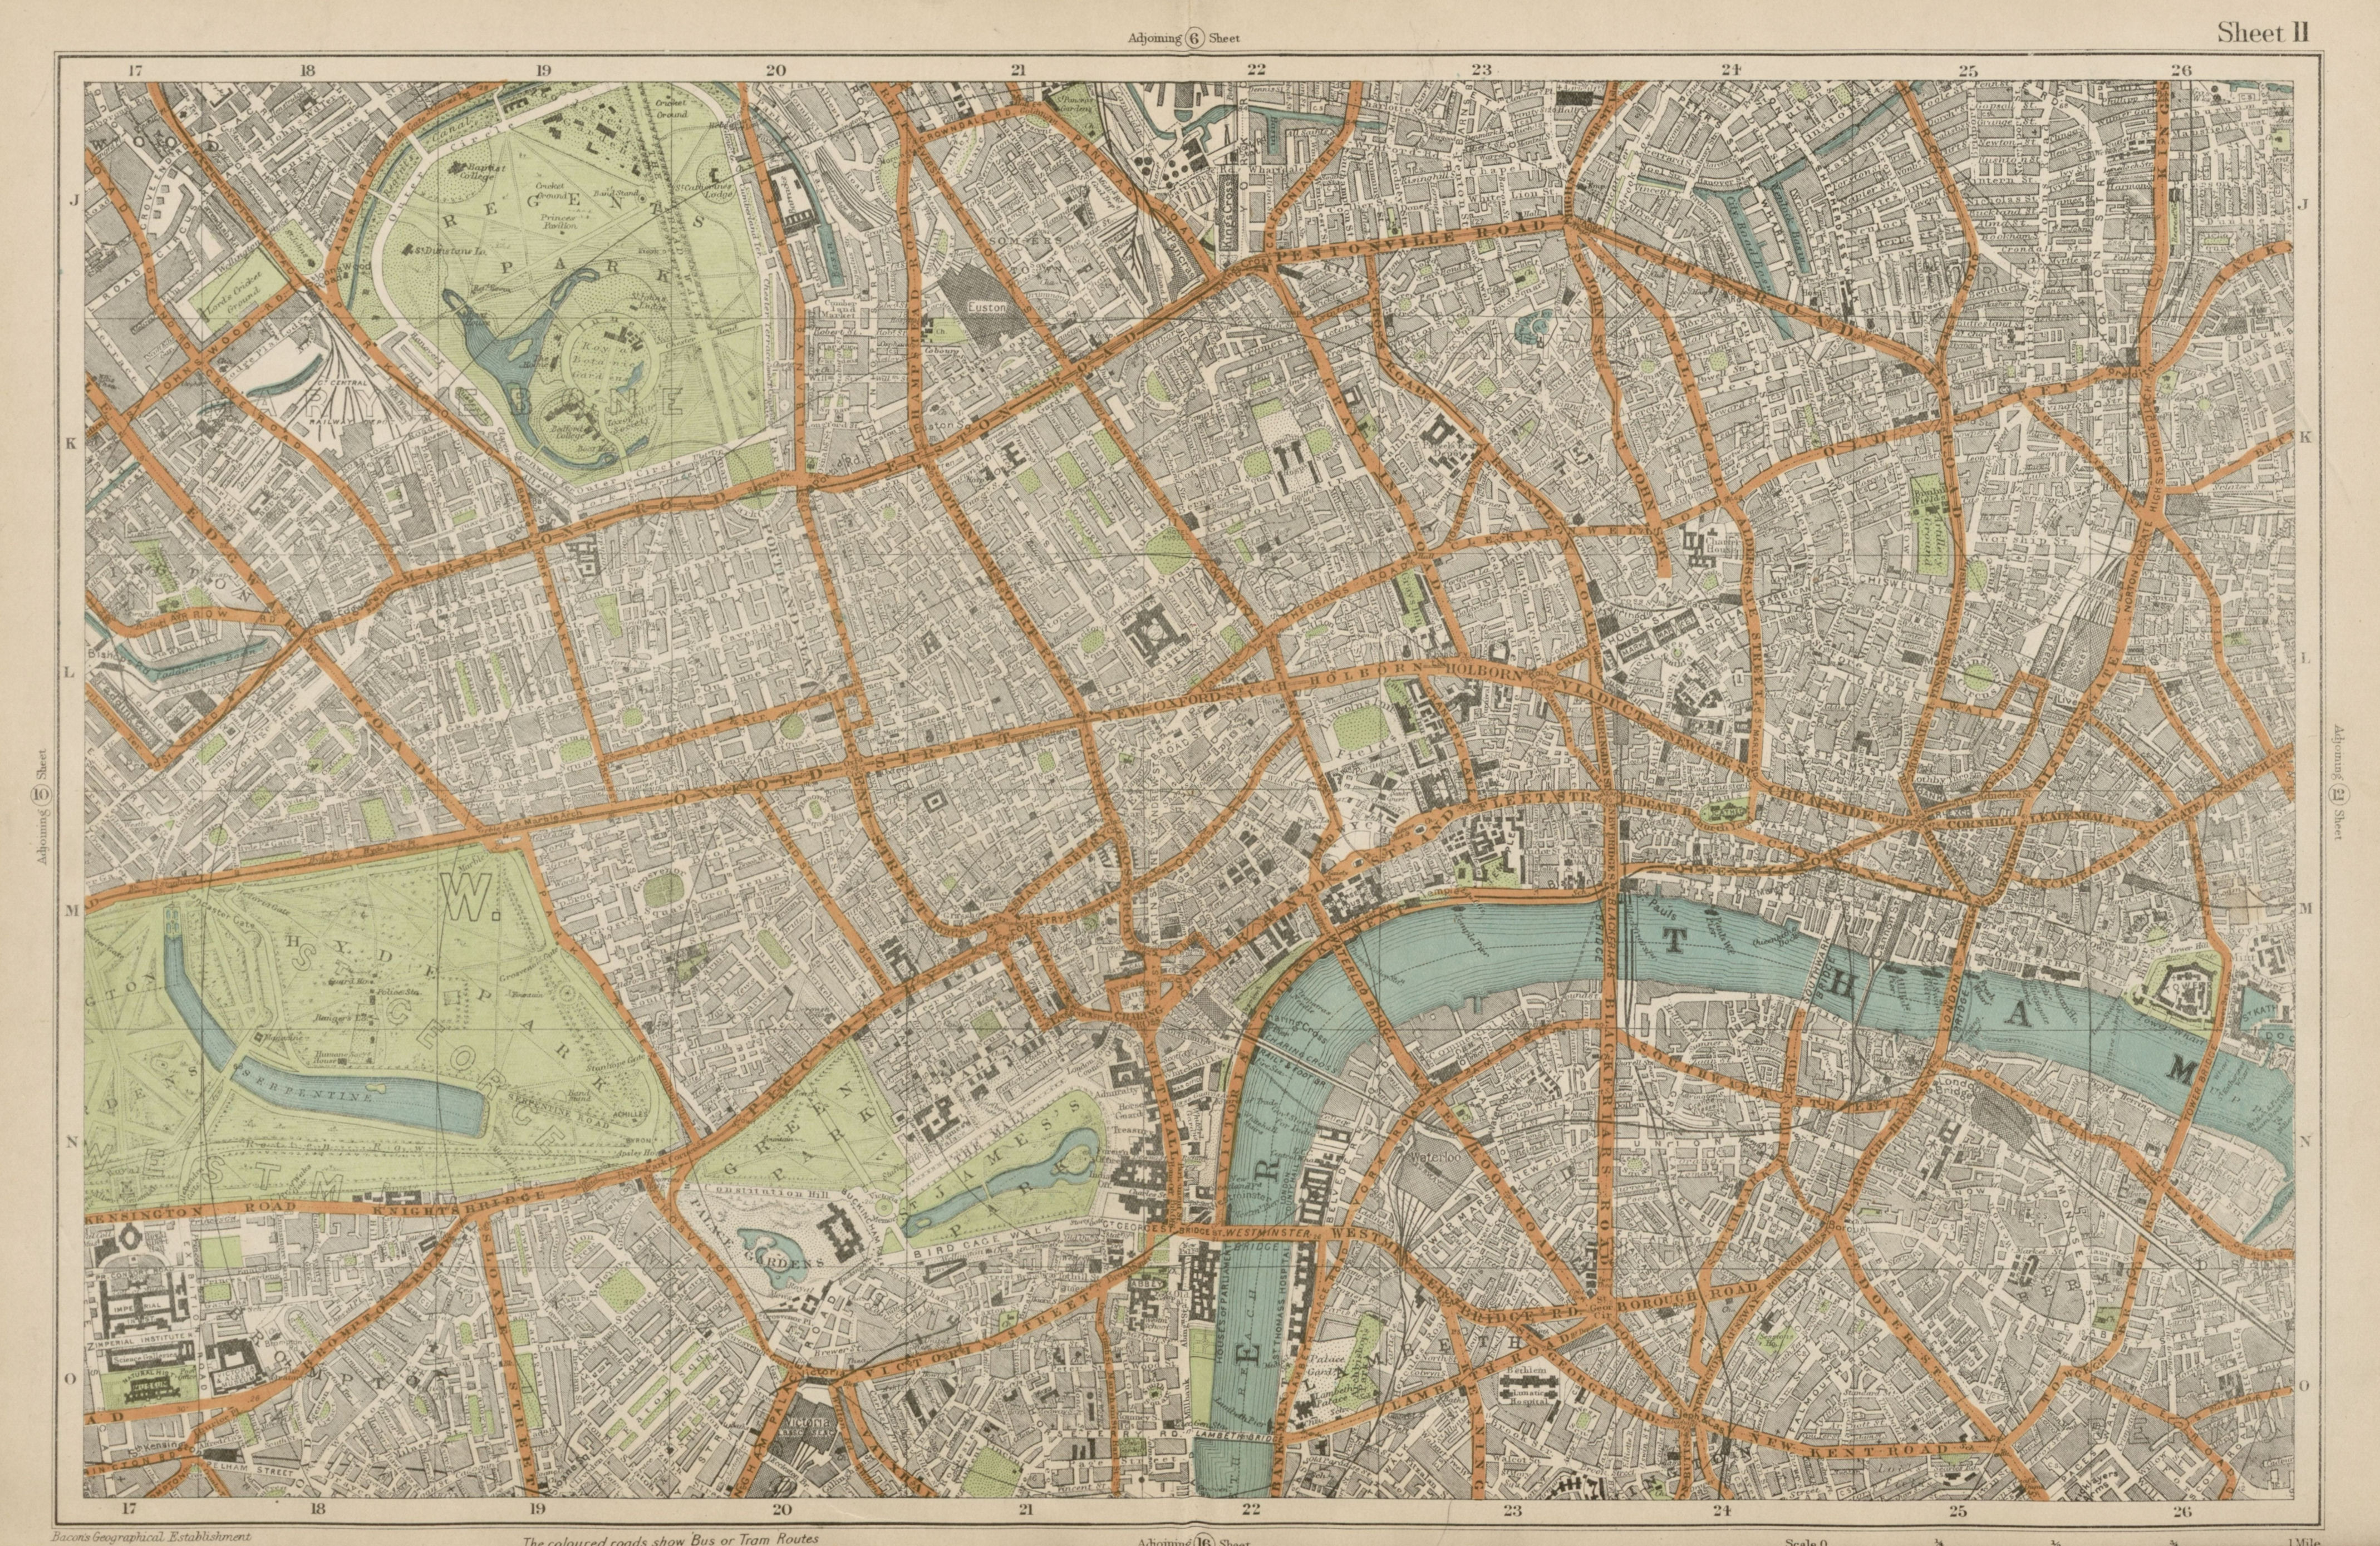 Associate Product CENTRAL LONDON West End City Southwark Westminster Shoreditch. BACON  1919 map